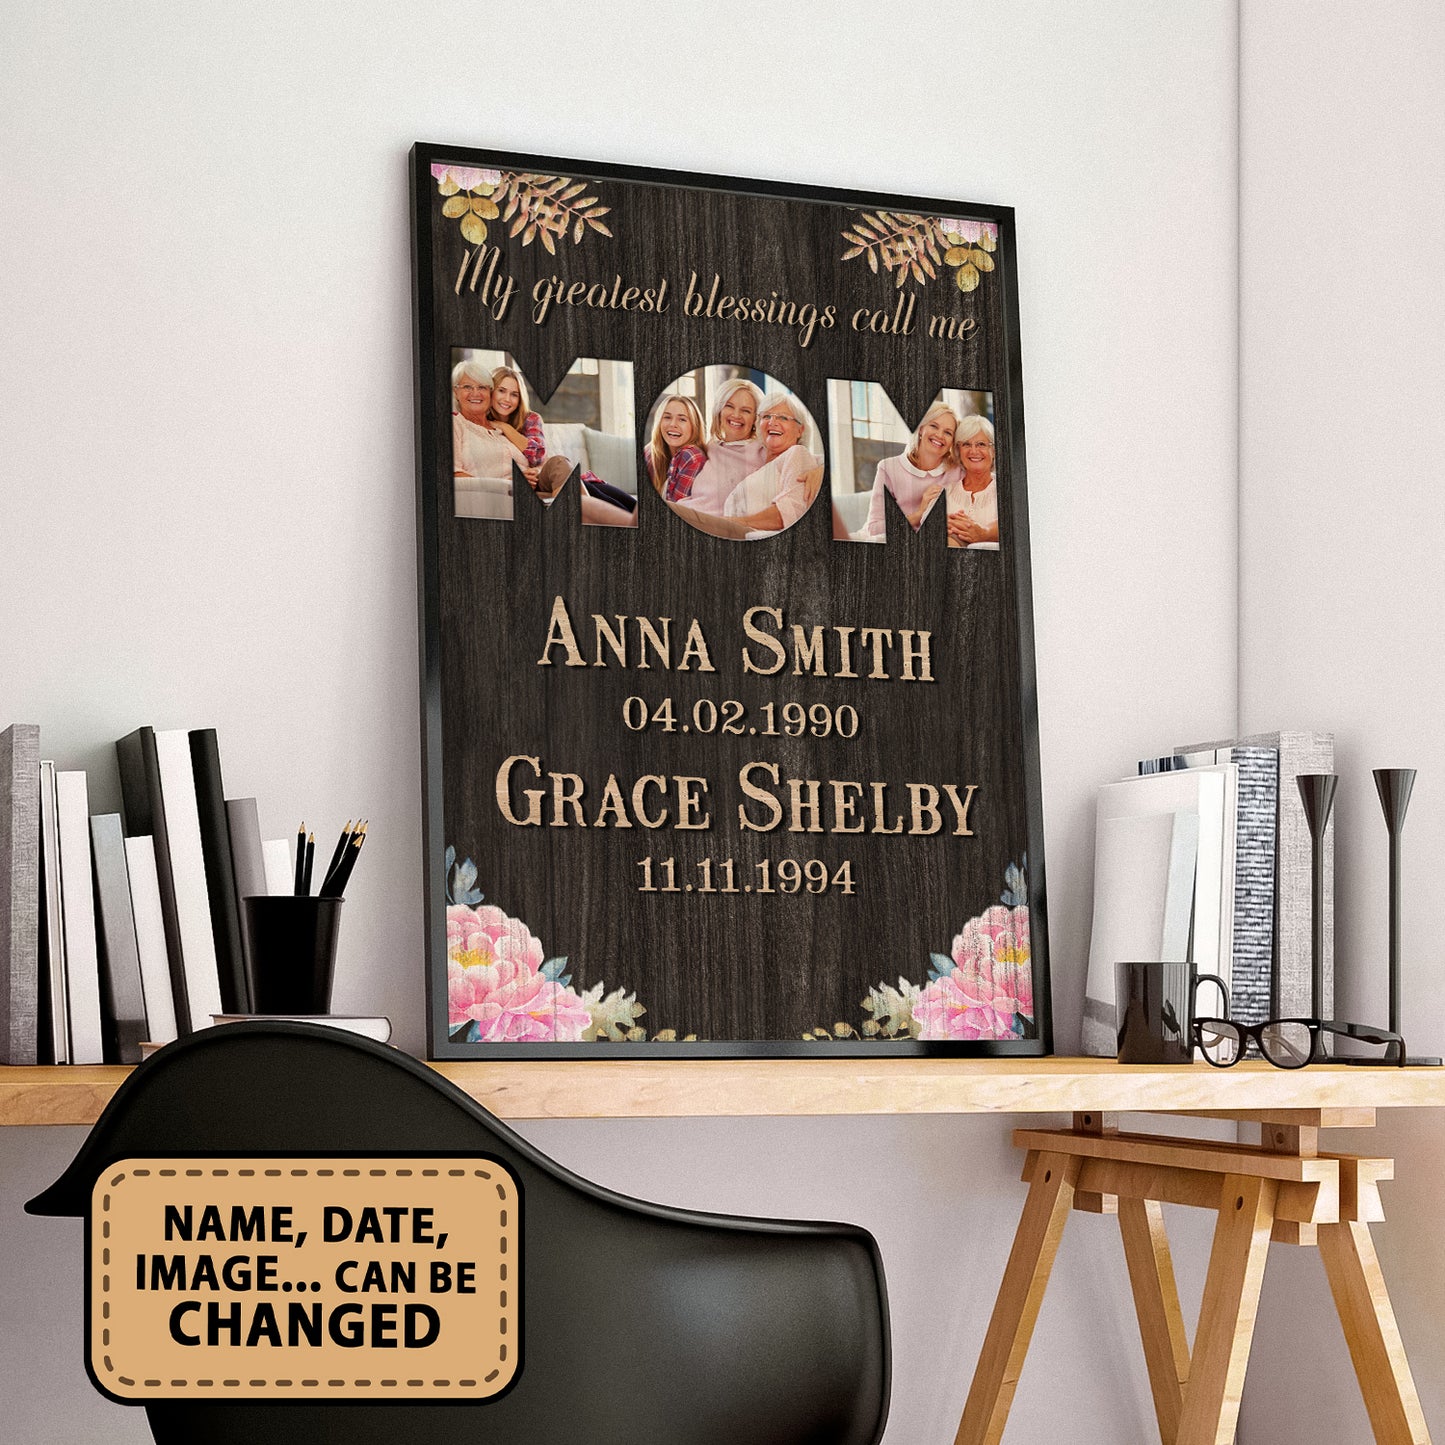 My Greatest Blessings Call Me Custom Image Poster